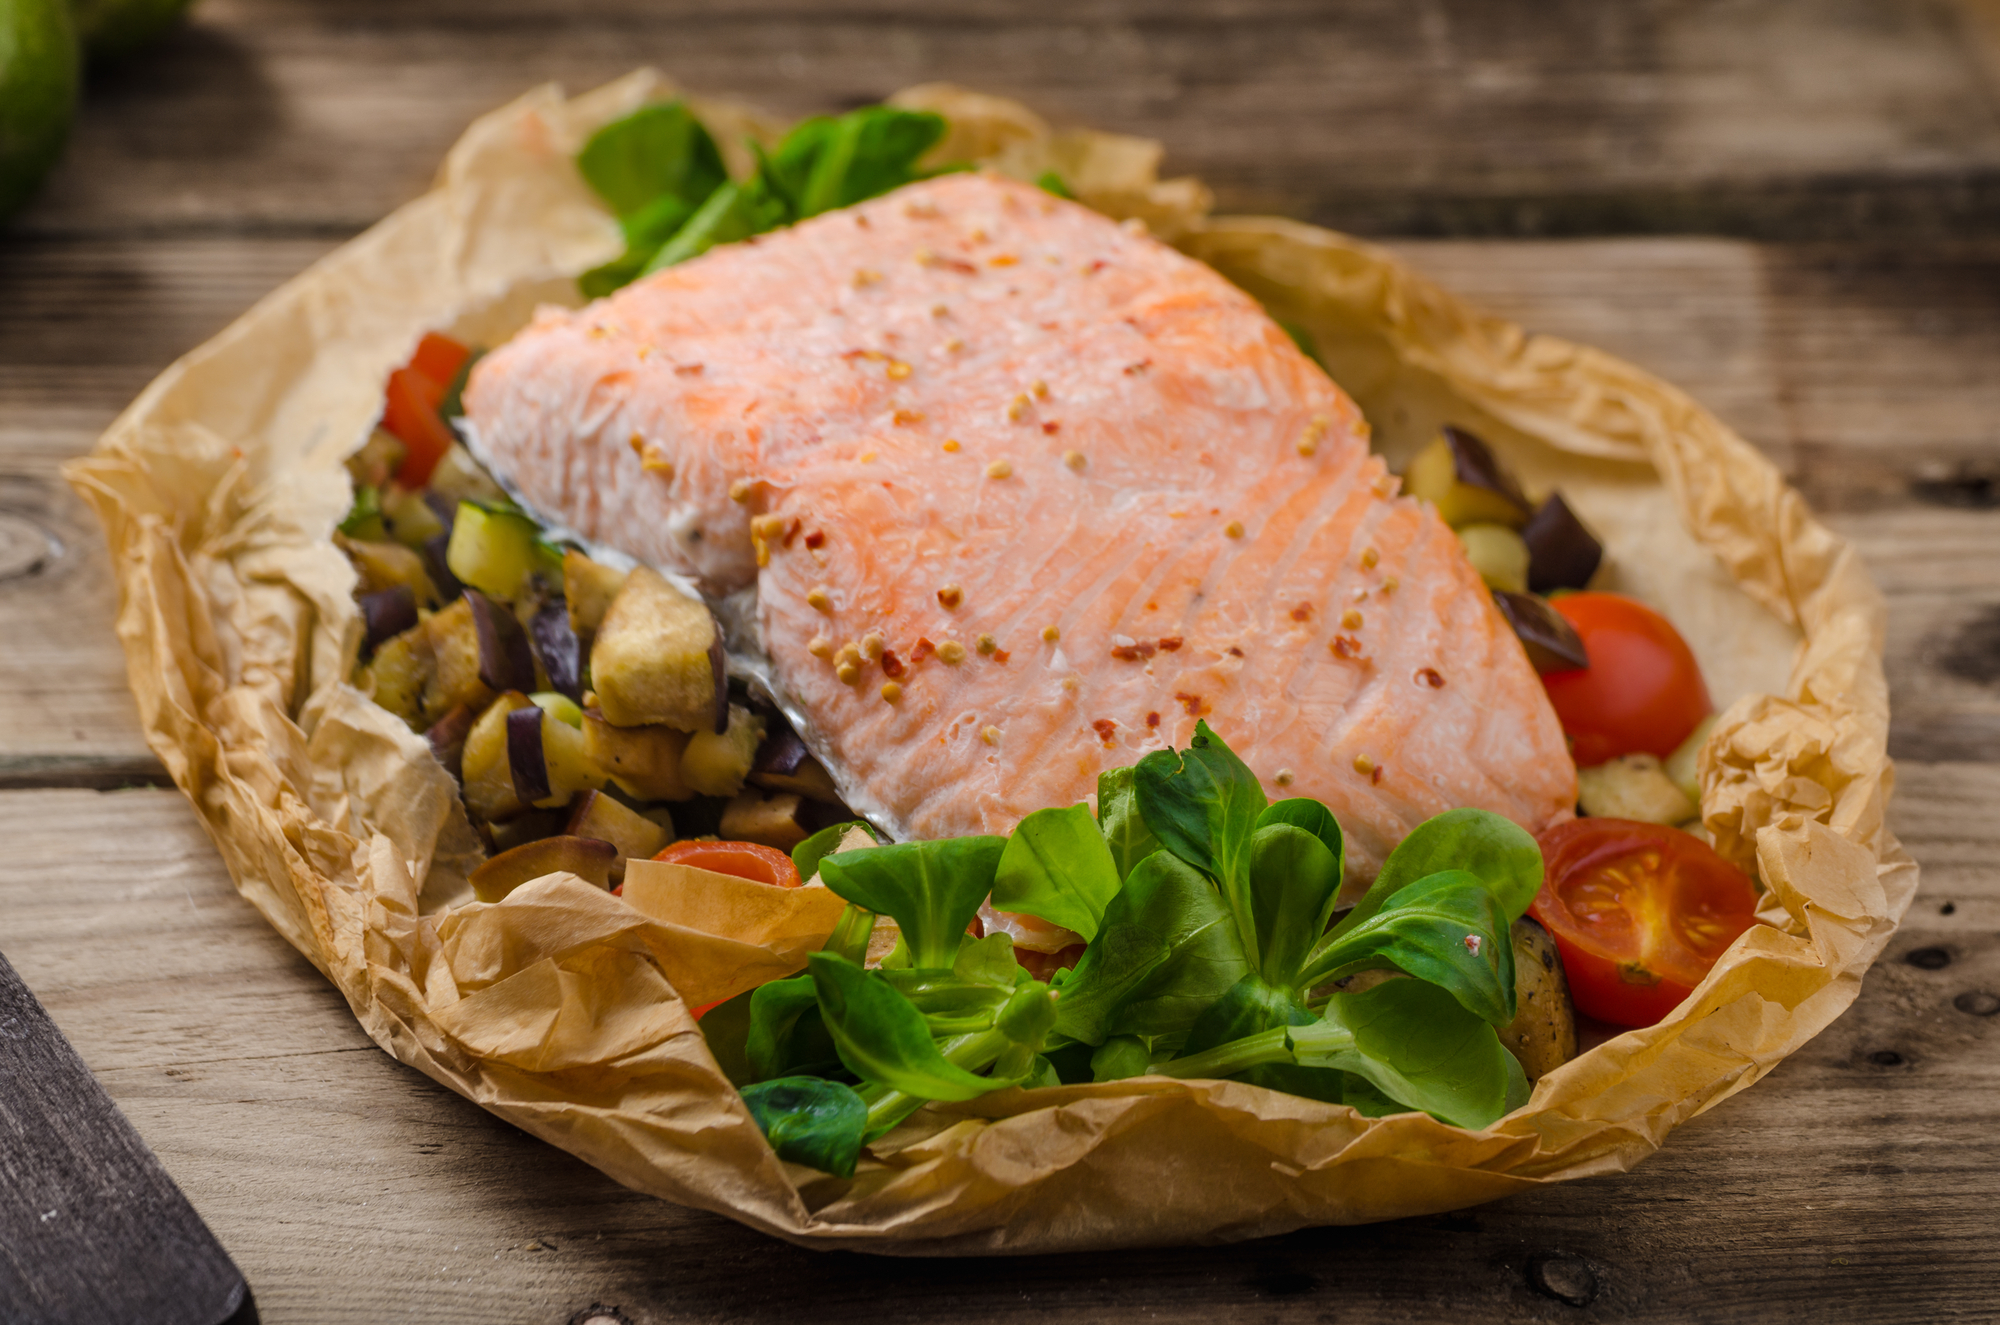 Salmon baked with Mediterranean vegetables in papillote